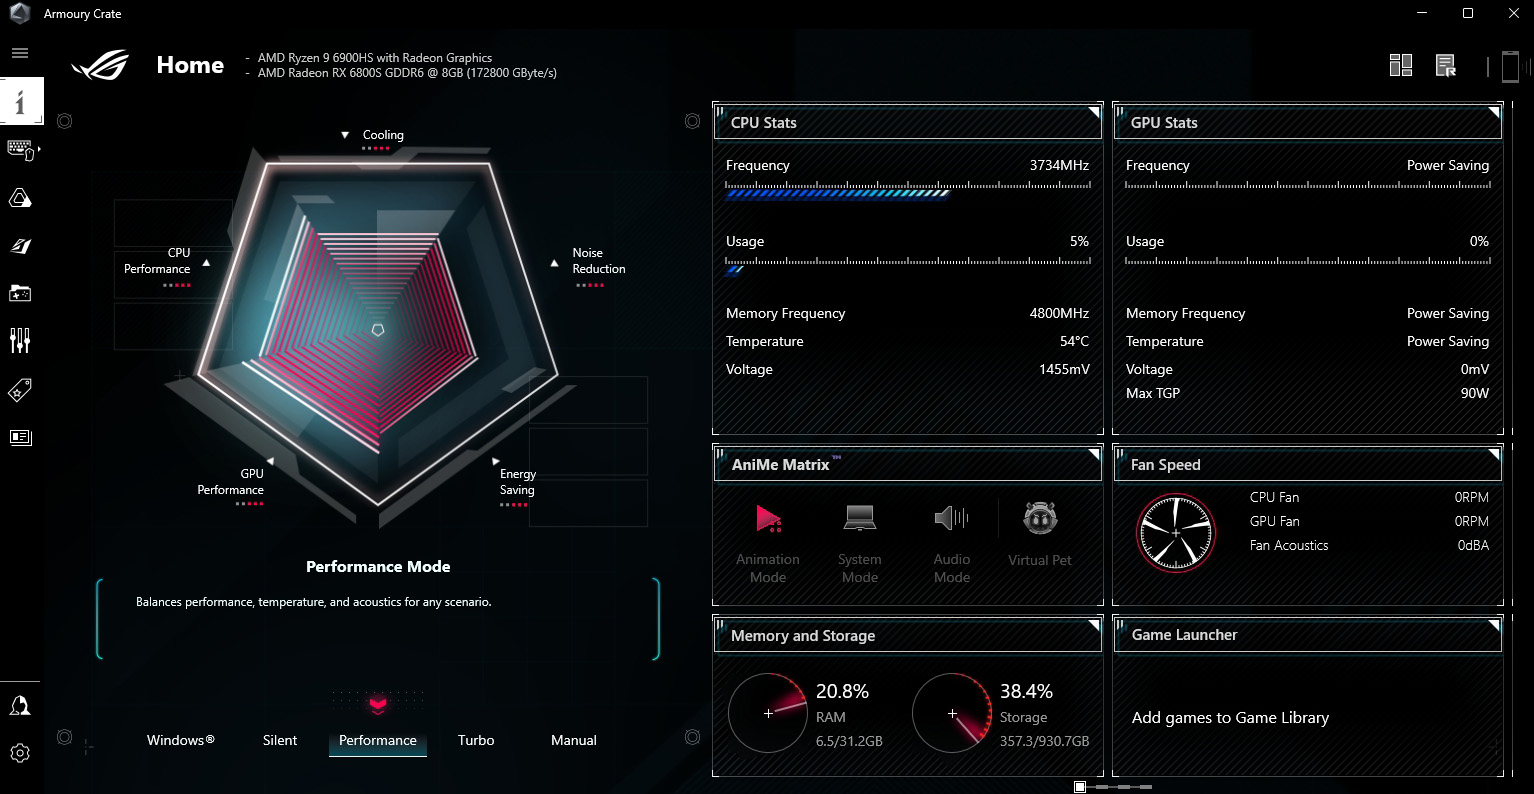 A screenshot of the Armoury Crate software with Performance mode enabled.